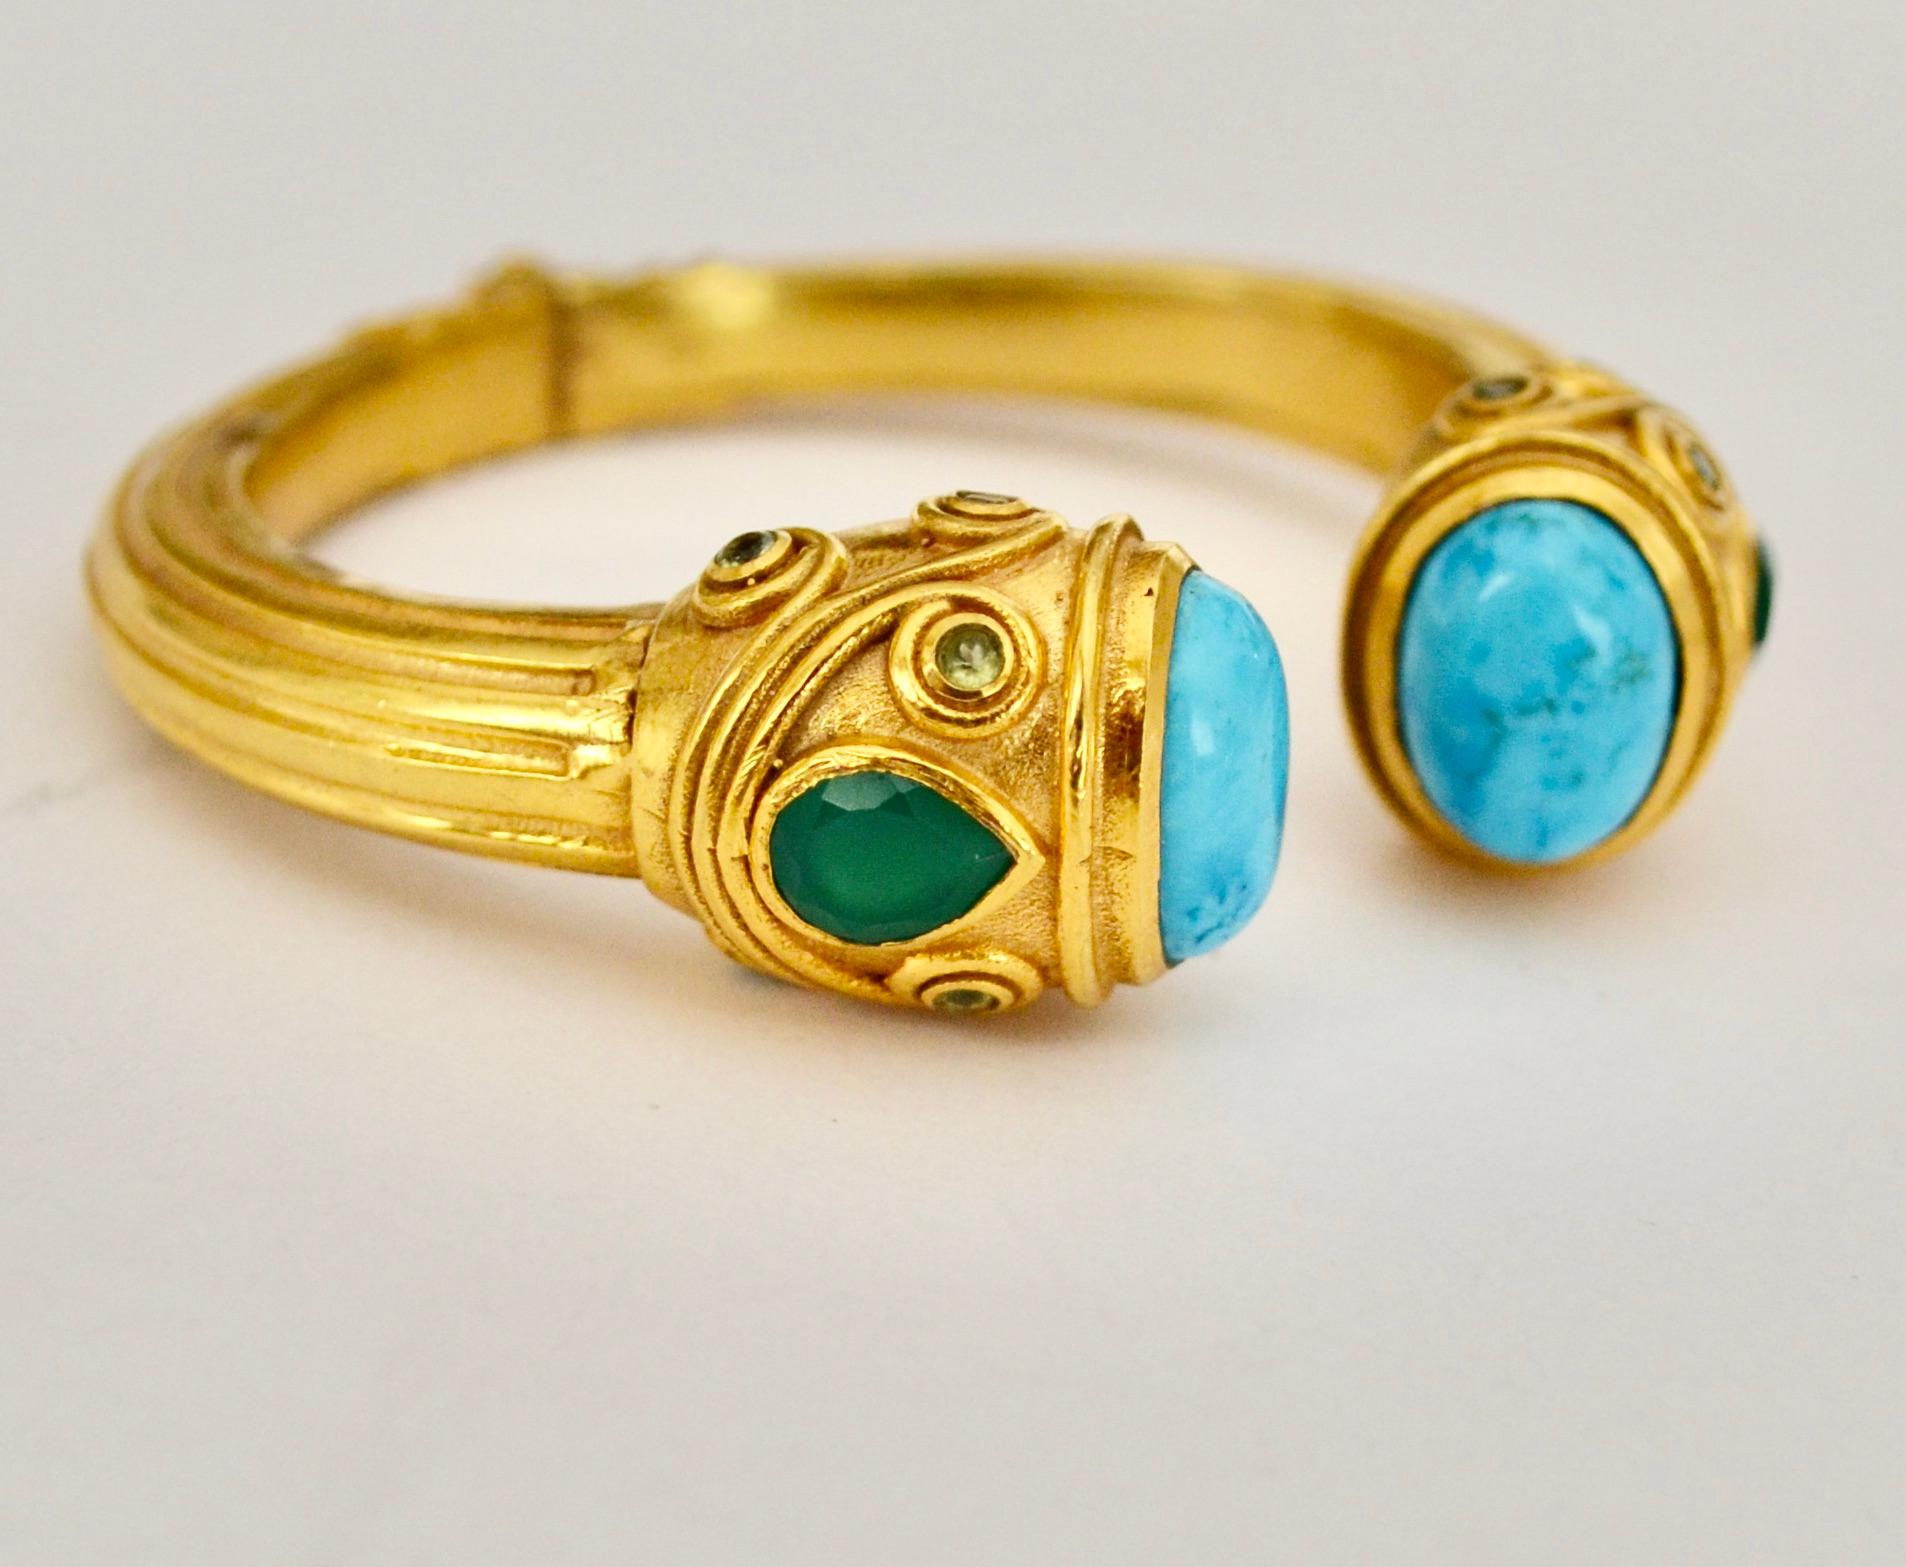 18-carat gilded brass hinged bracelet. Size is expendable. Turquoise, green onyx and aquamarine stones. Bracelet size opens from 2..4” to 5.2”
French designer